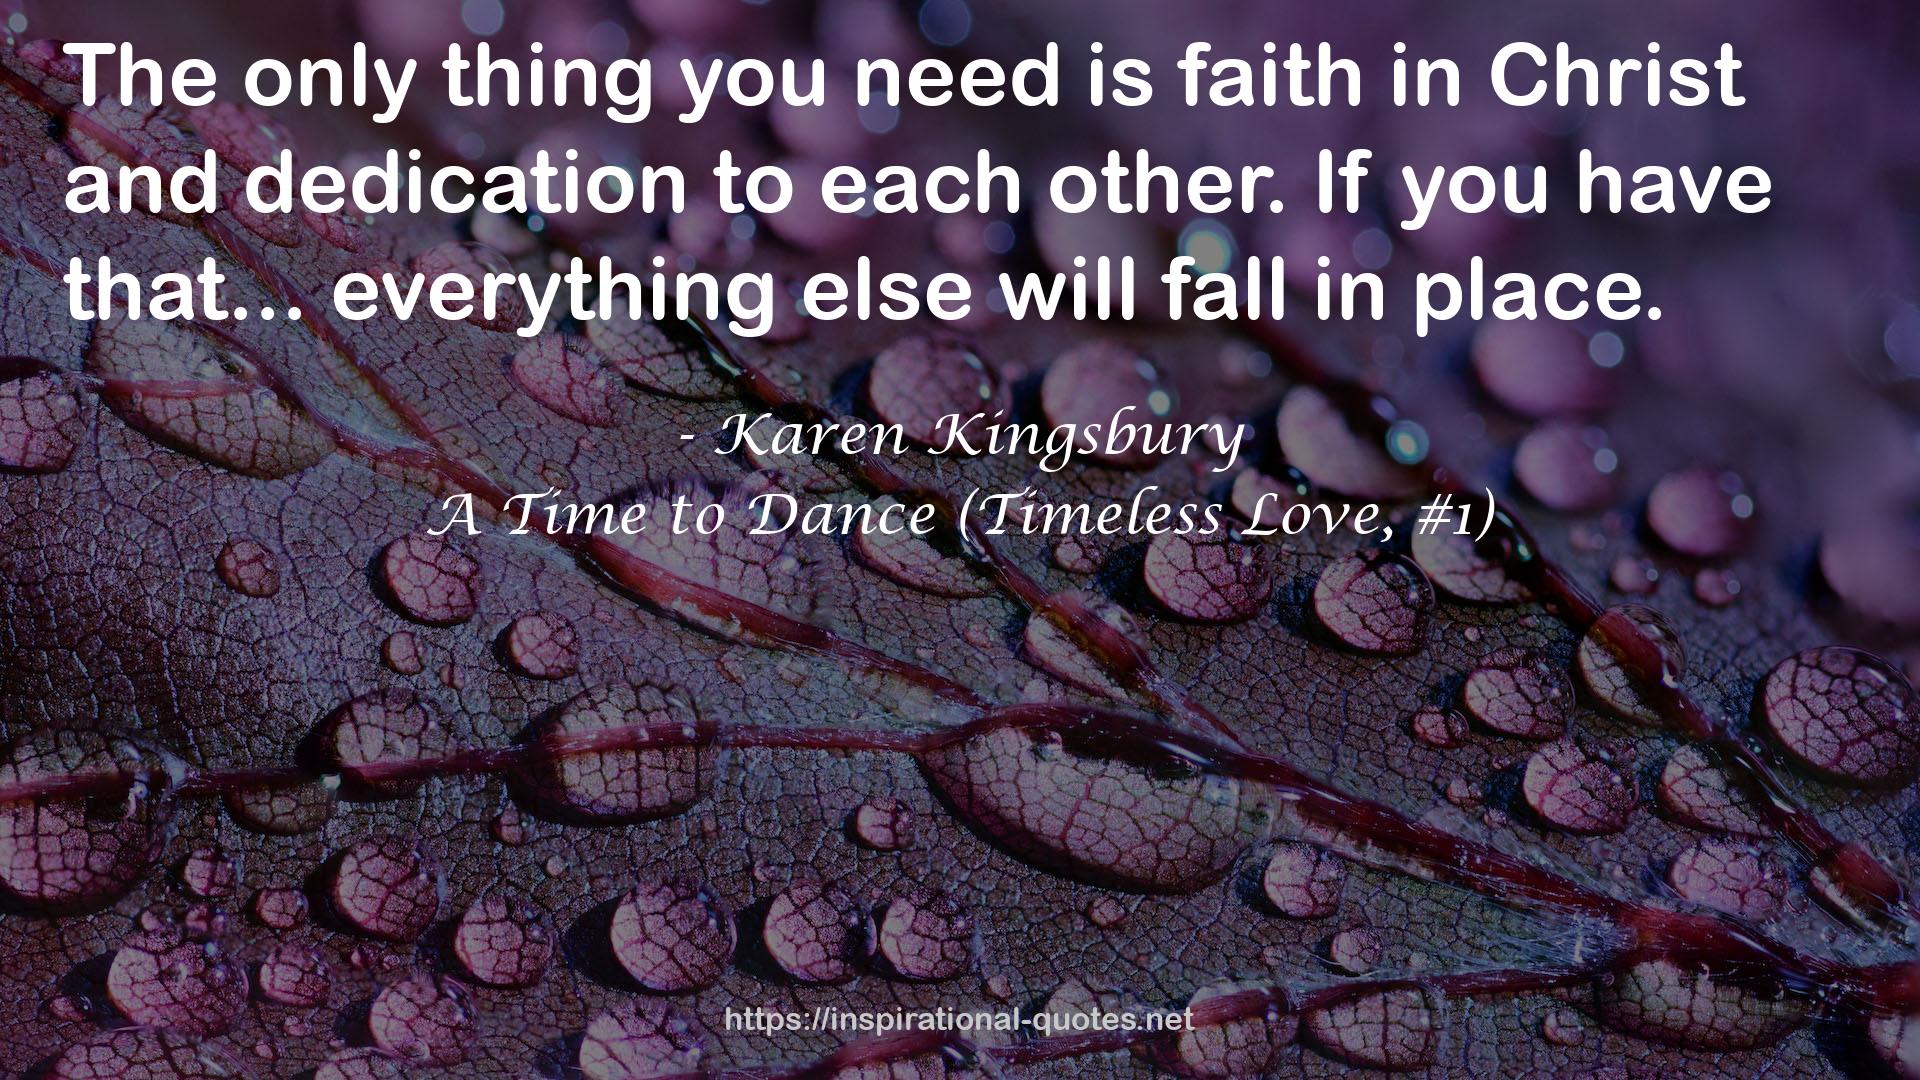 A Time to Dance (Timeless Love, #1) QUOTES